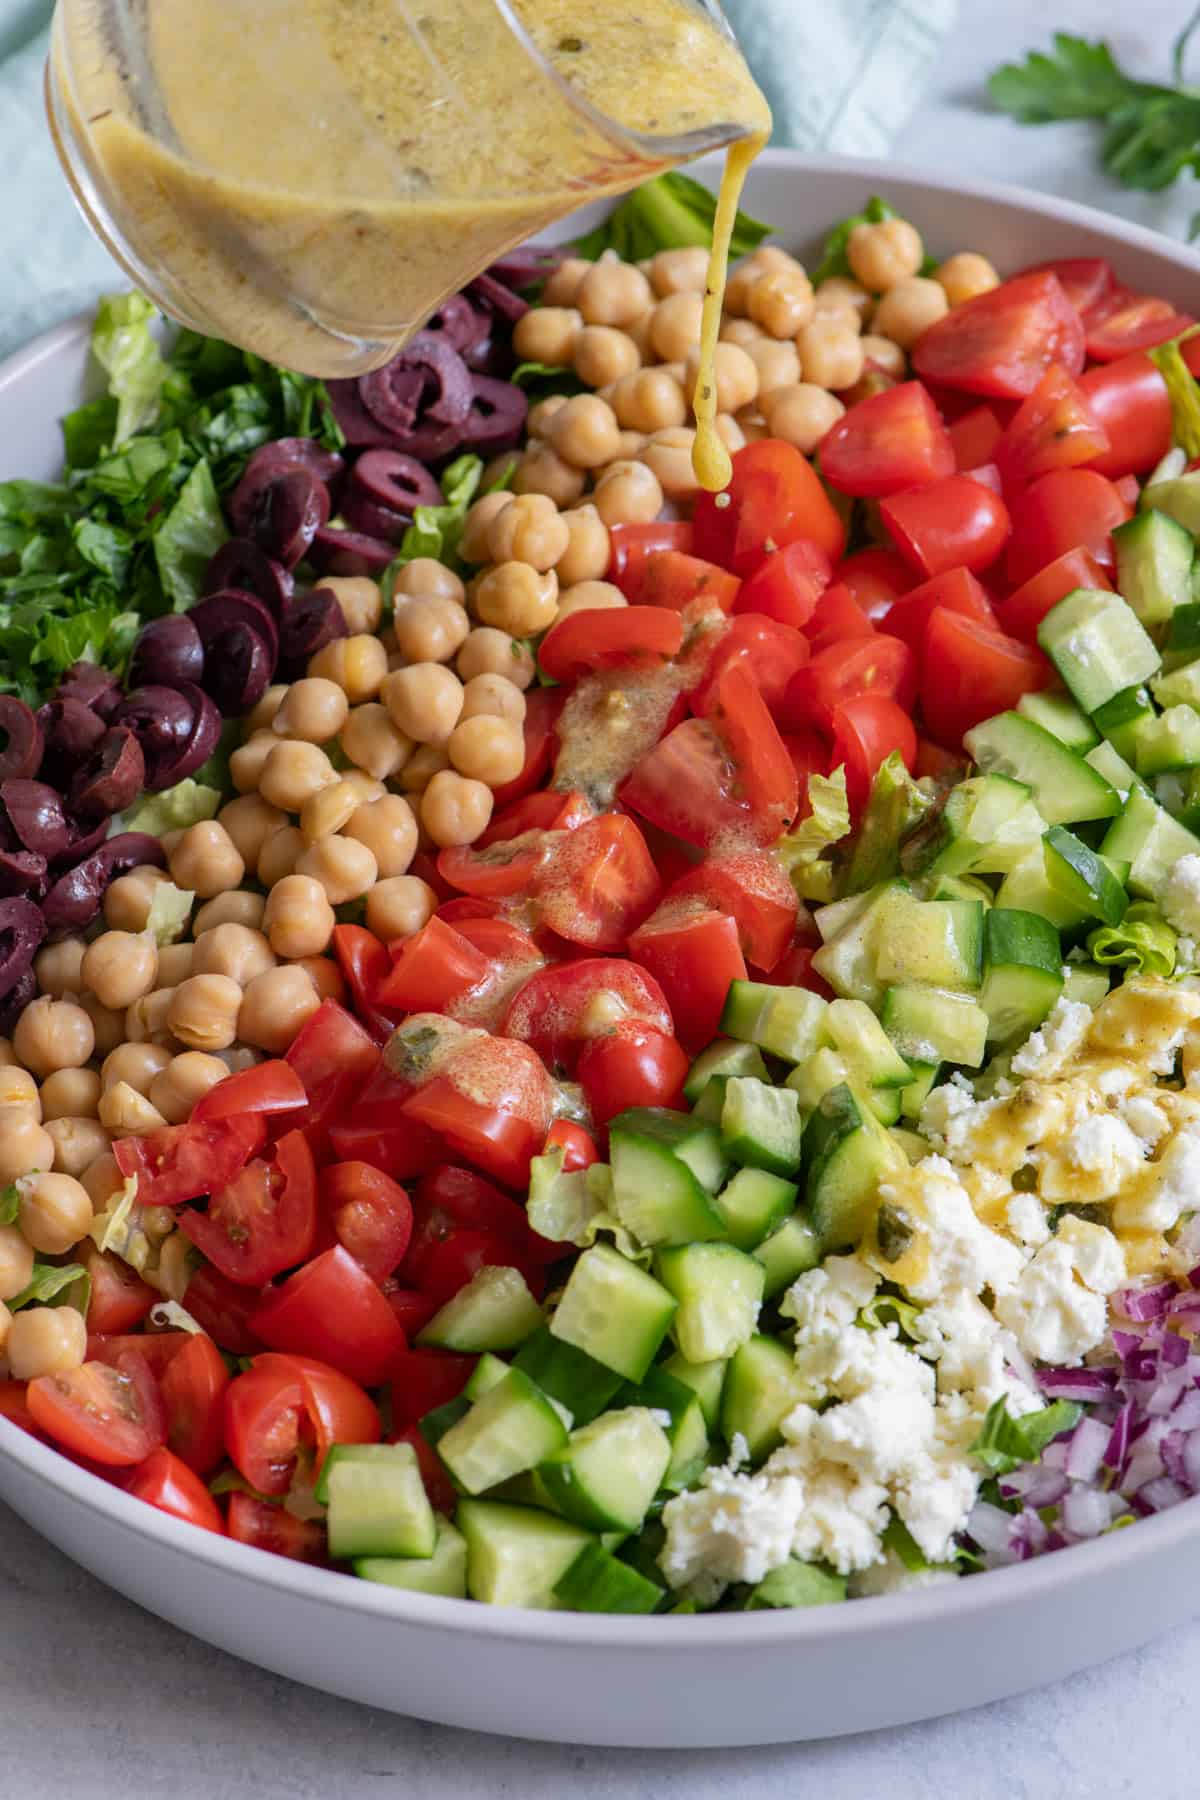 Dressing poured over a big bowl of salad with lettuce, olives, chickpeas, chopped tomatoes, diced cucumbers, feta, and diced red onions.